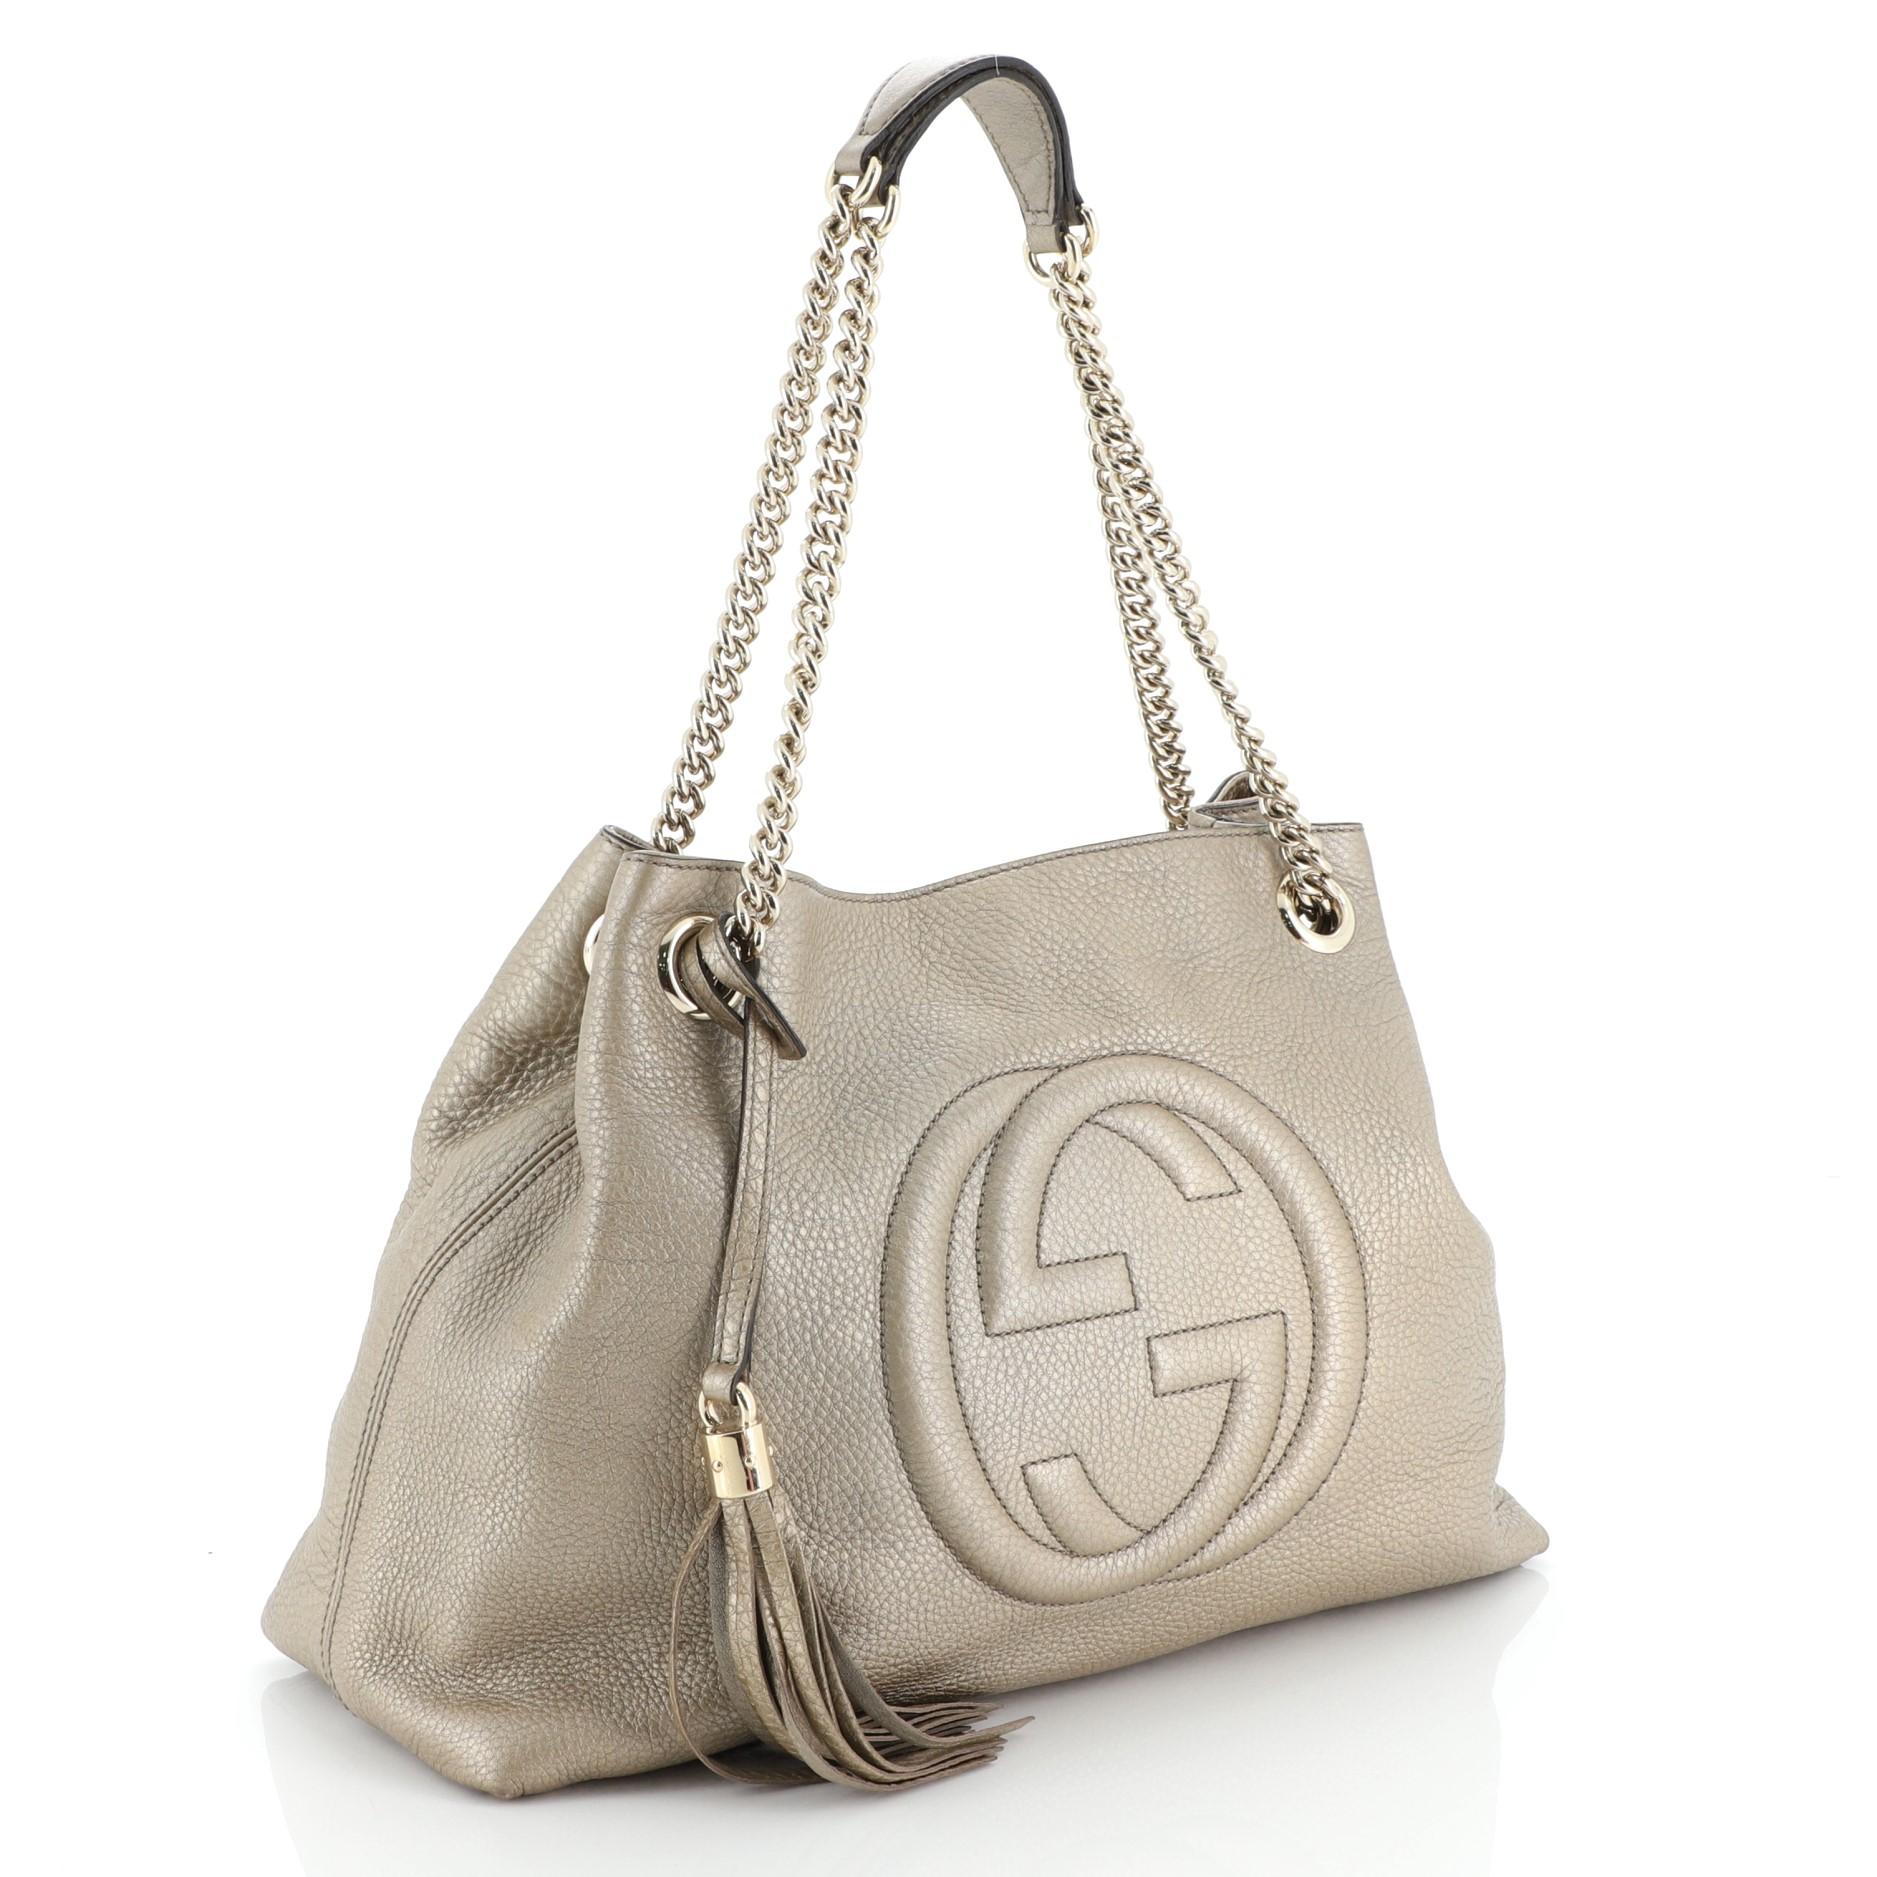 This Gucci Soho Chain Strap Shoulder Bag Leather Medium, crafted in neutral leather, features chain link straps with leather pads and gold-tone hardware. Its hook clasp closure opens to a neutral fabric interior with side zip and slip pockets.